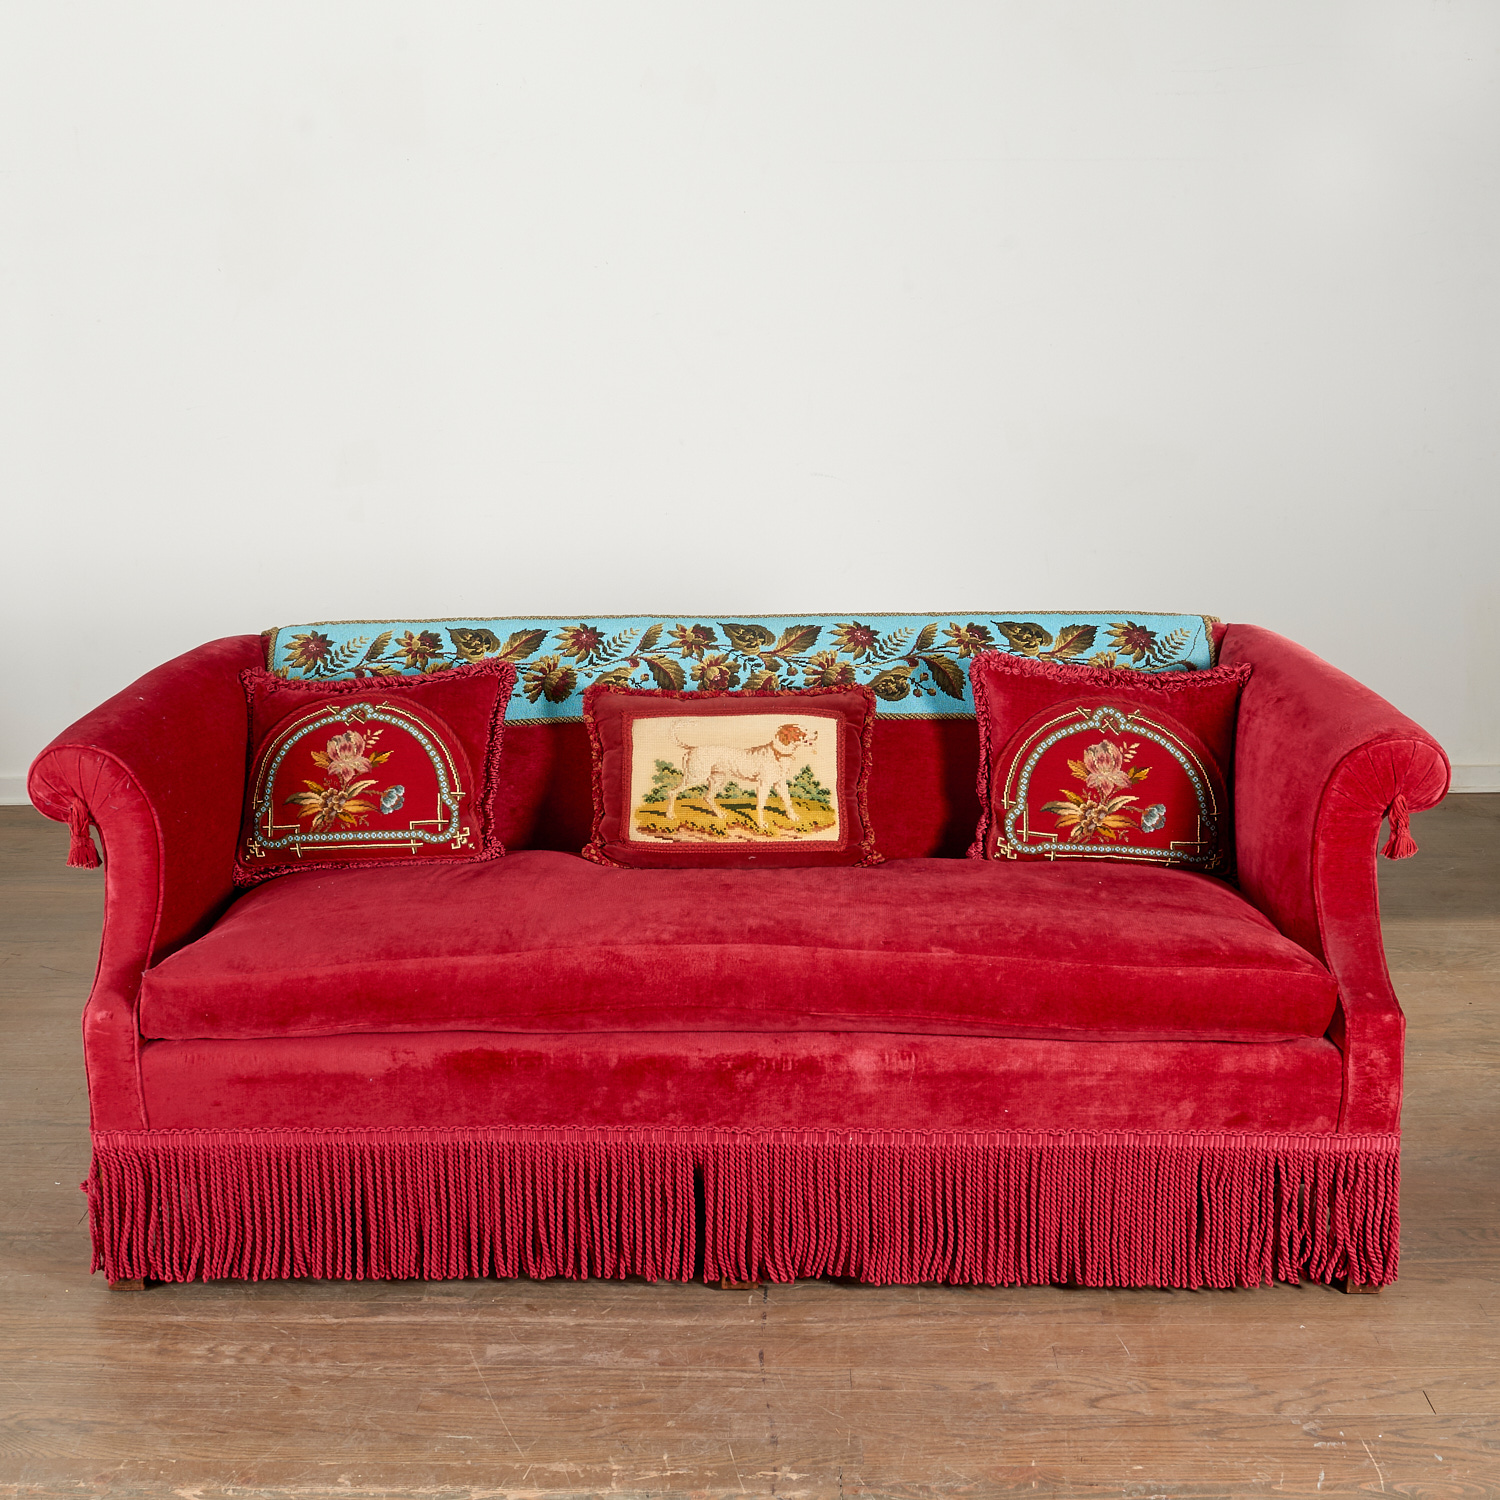 NICE RED VELVET SOFA WITH VICTORIAN 362495